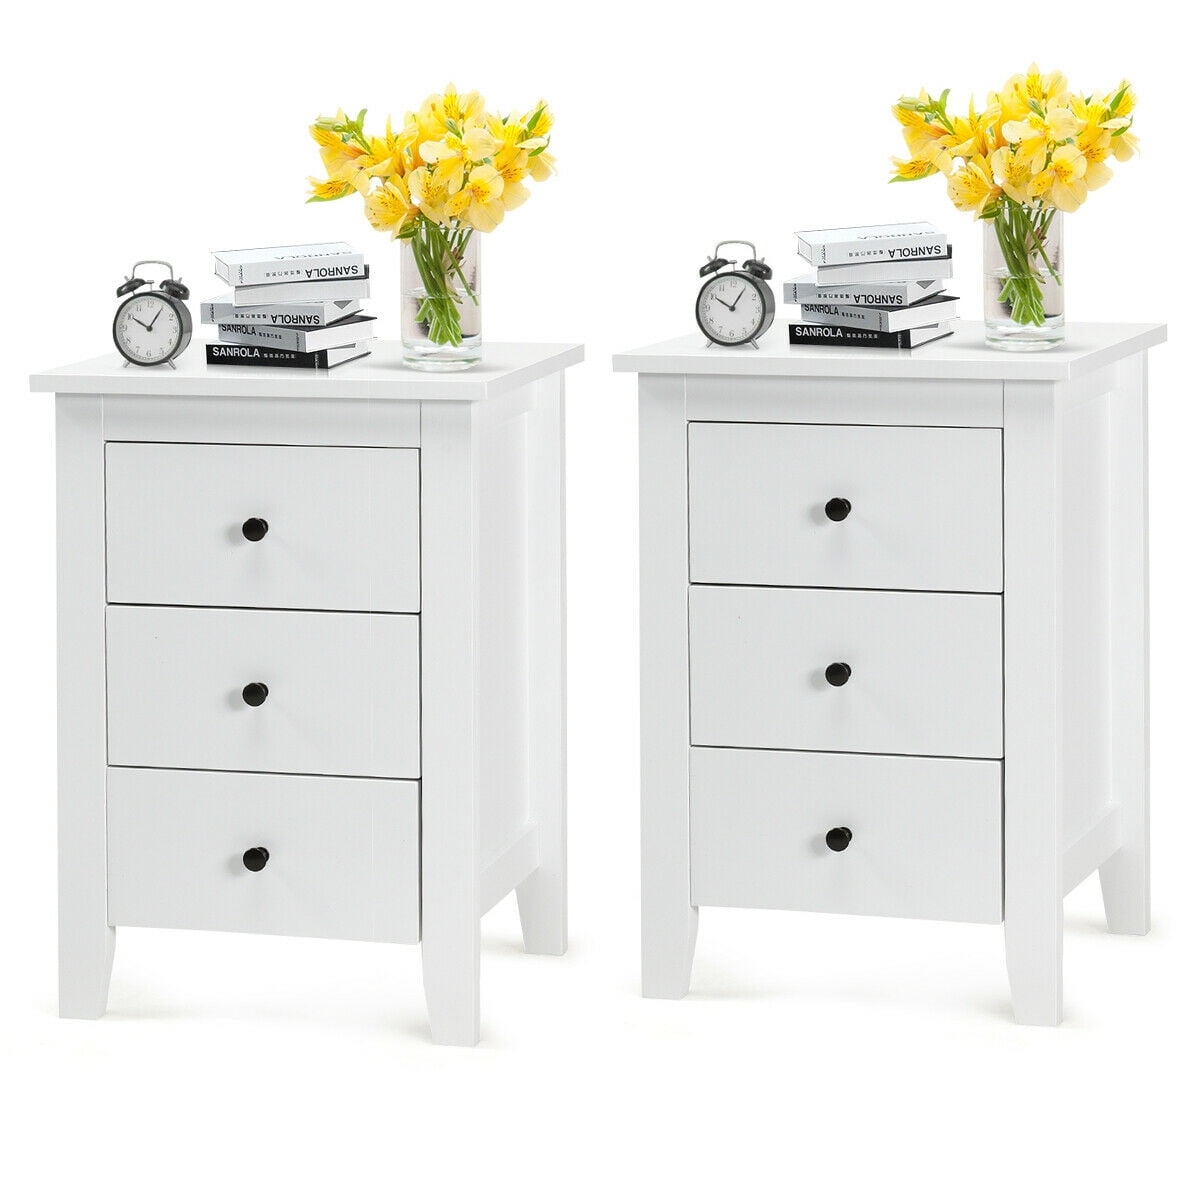 Details about   Modern Nightstand Bedside End Table Bedroom Side Stand Accent Storage Drawers PF 